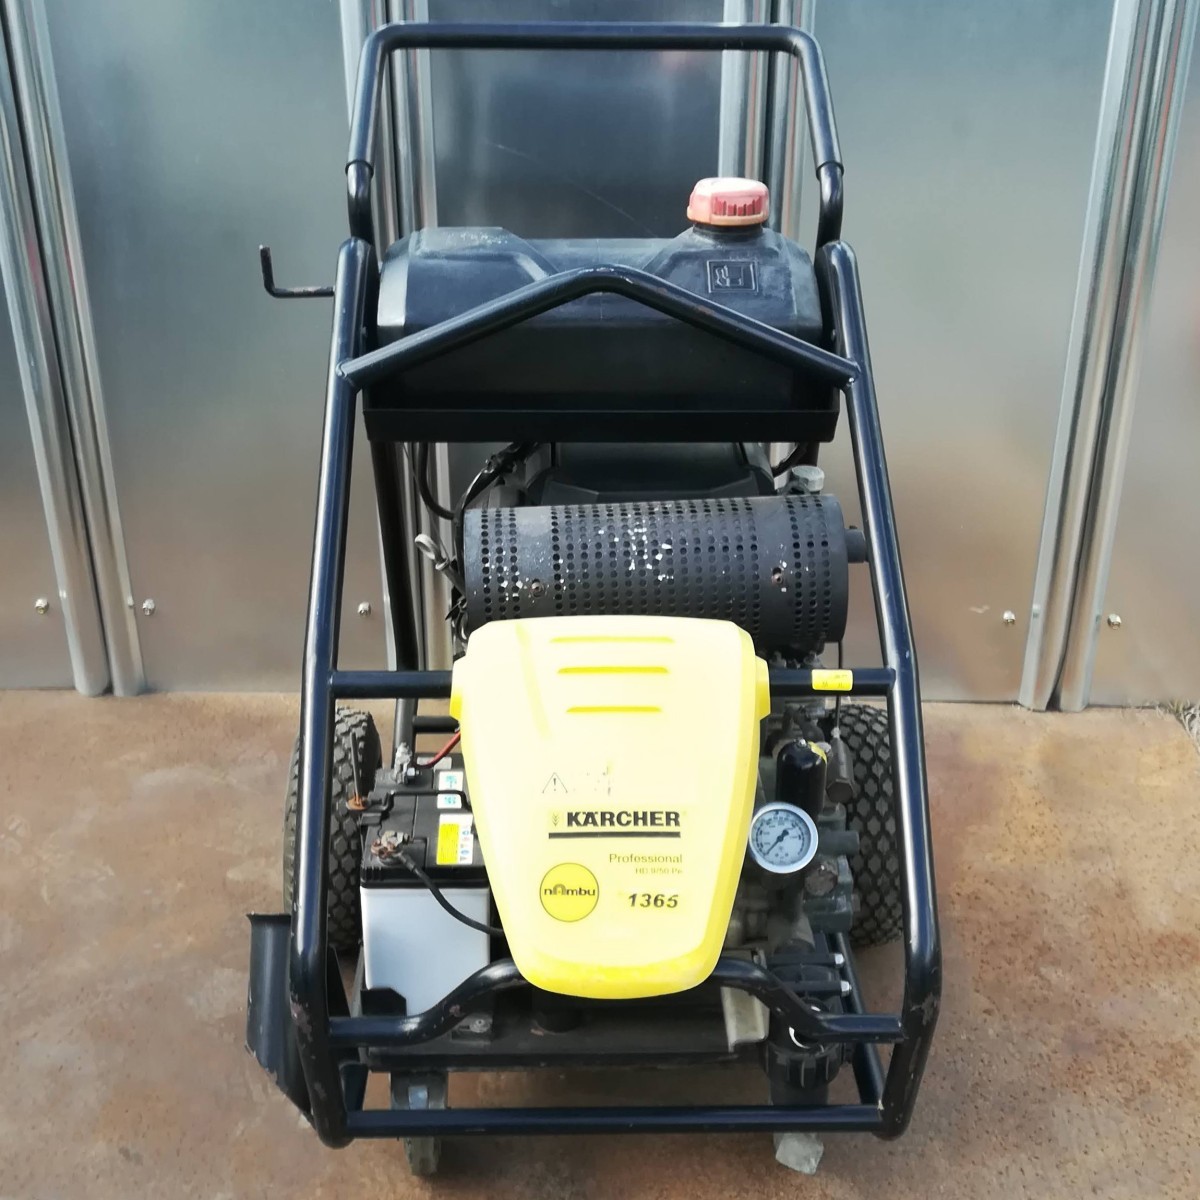 [ used ]Karcher Karcher super high pressure washer HD9/50 Pe Cage business use cold water engine type #1365